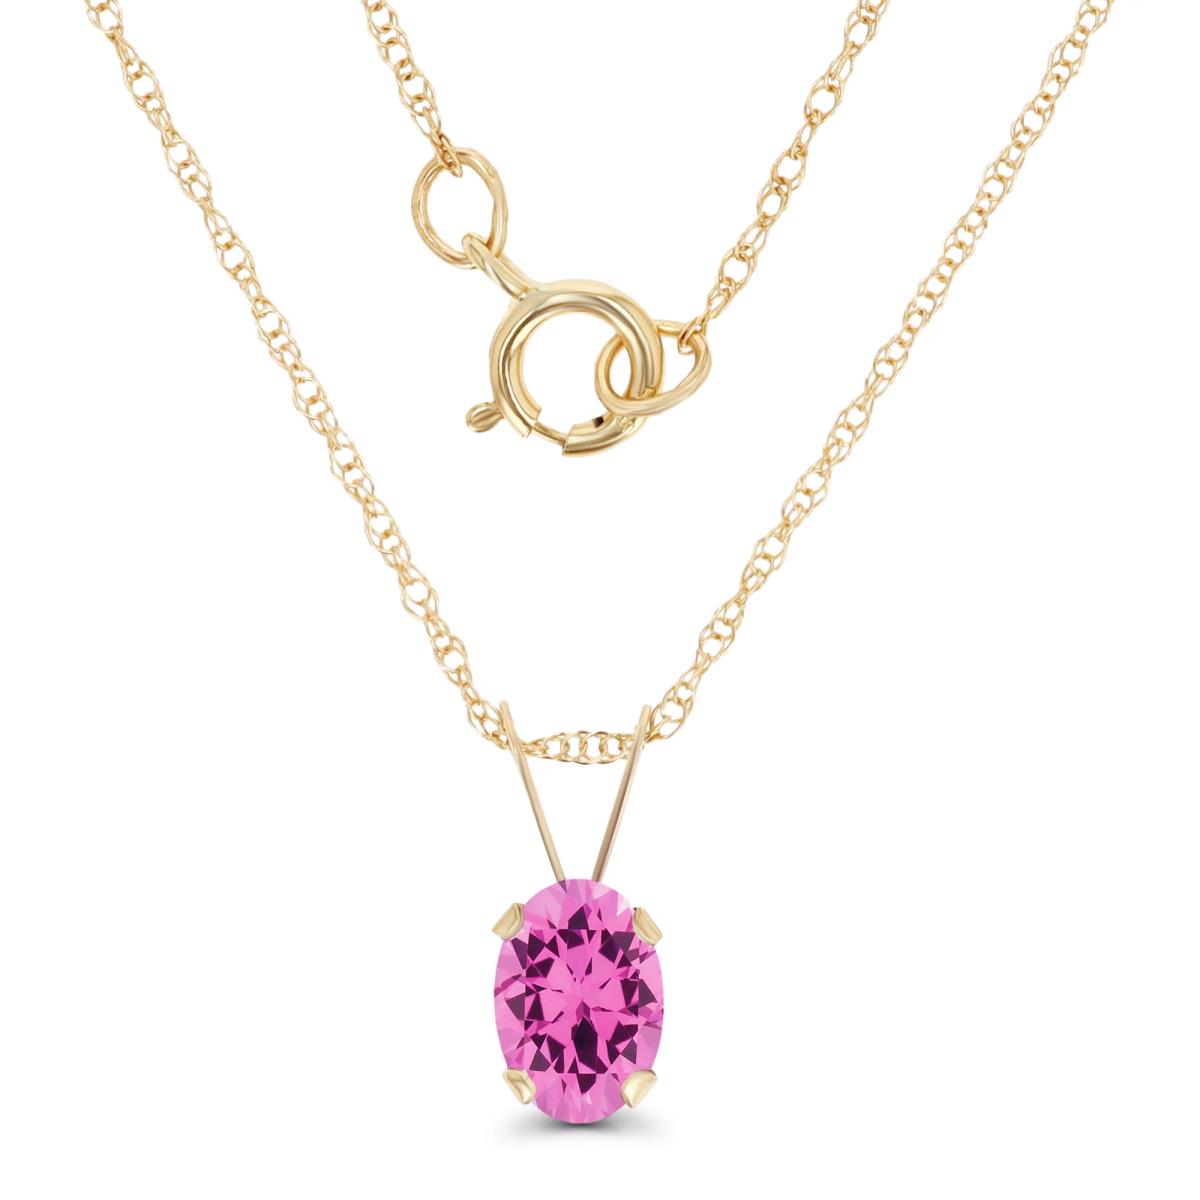 10K Yellow Gold 6x4mm Oval Cr Pink Sapphire 18" Rope Chain Necklace